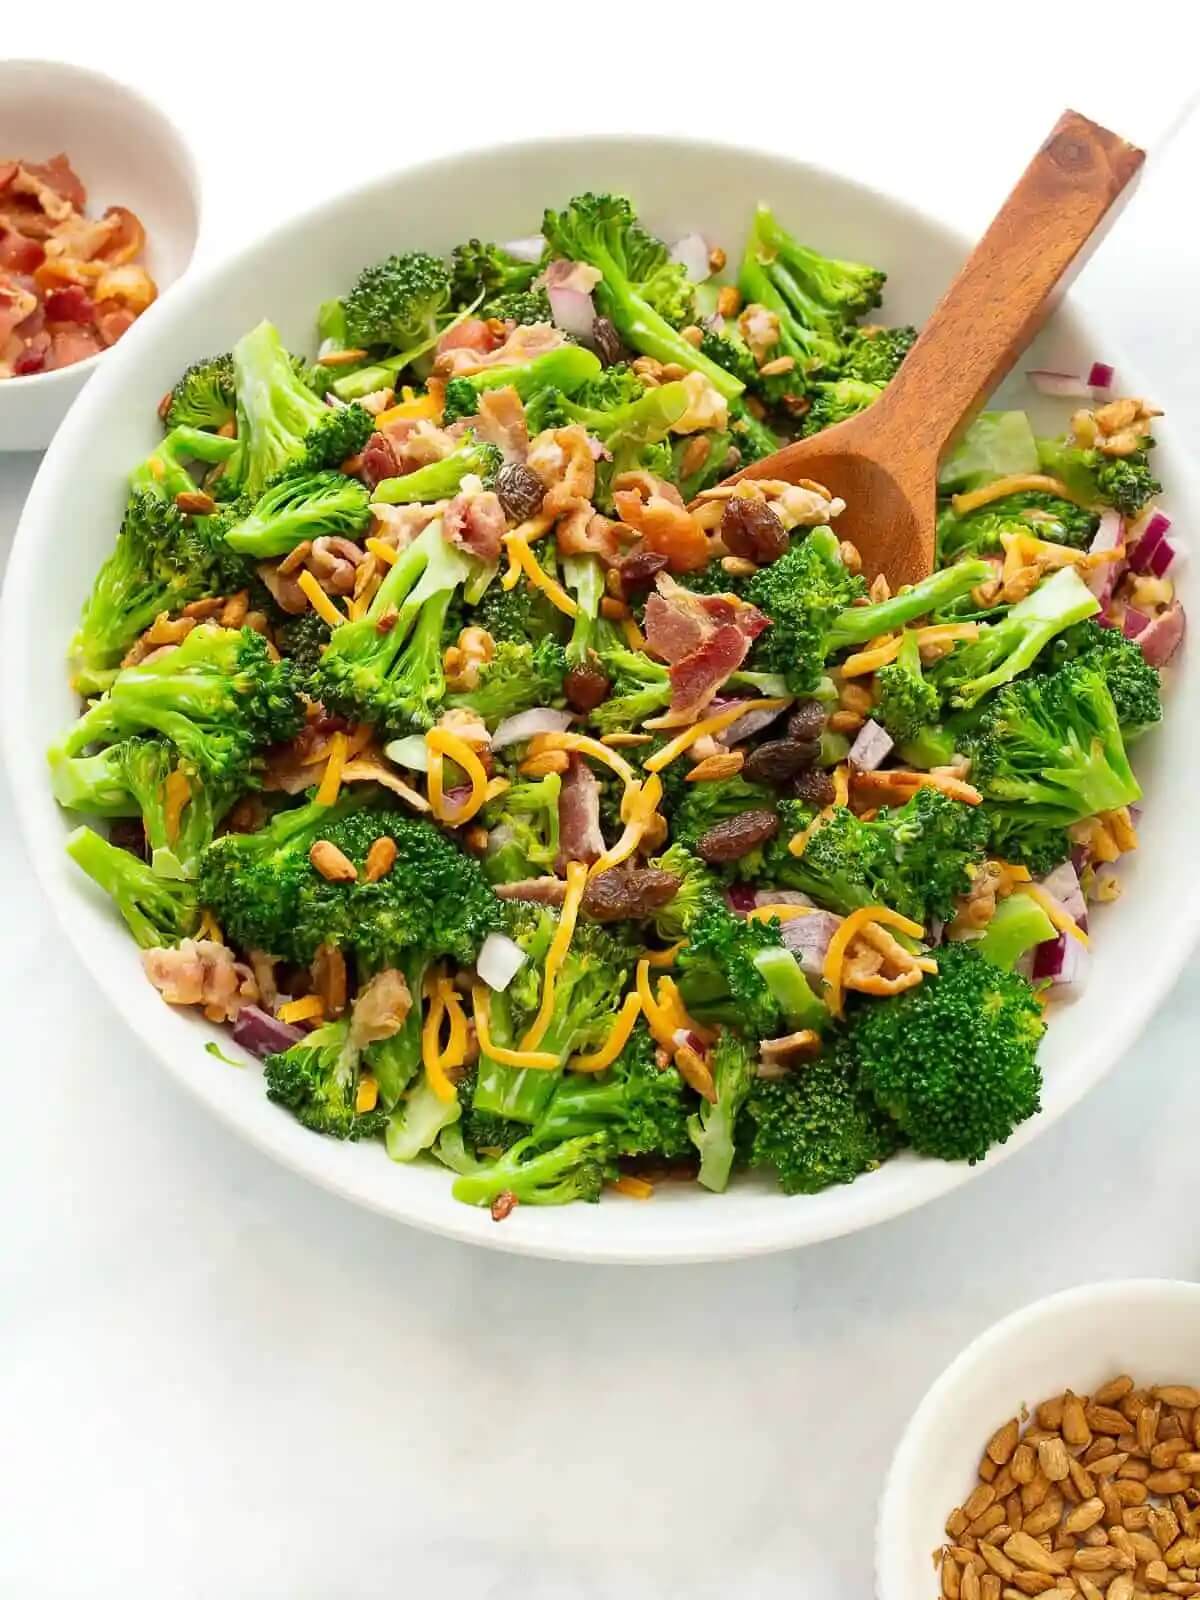 large white bowl with wooden spoon filled with broccoli salad